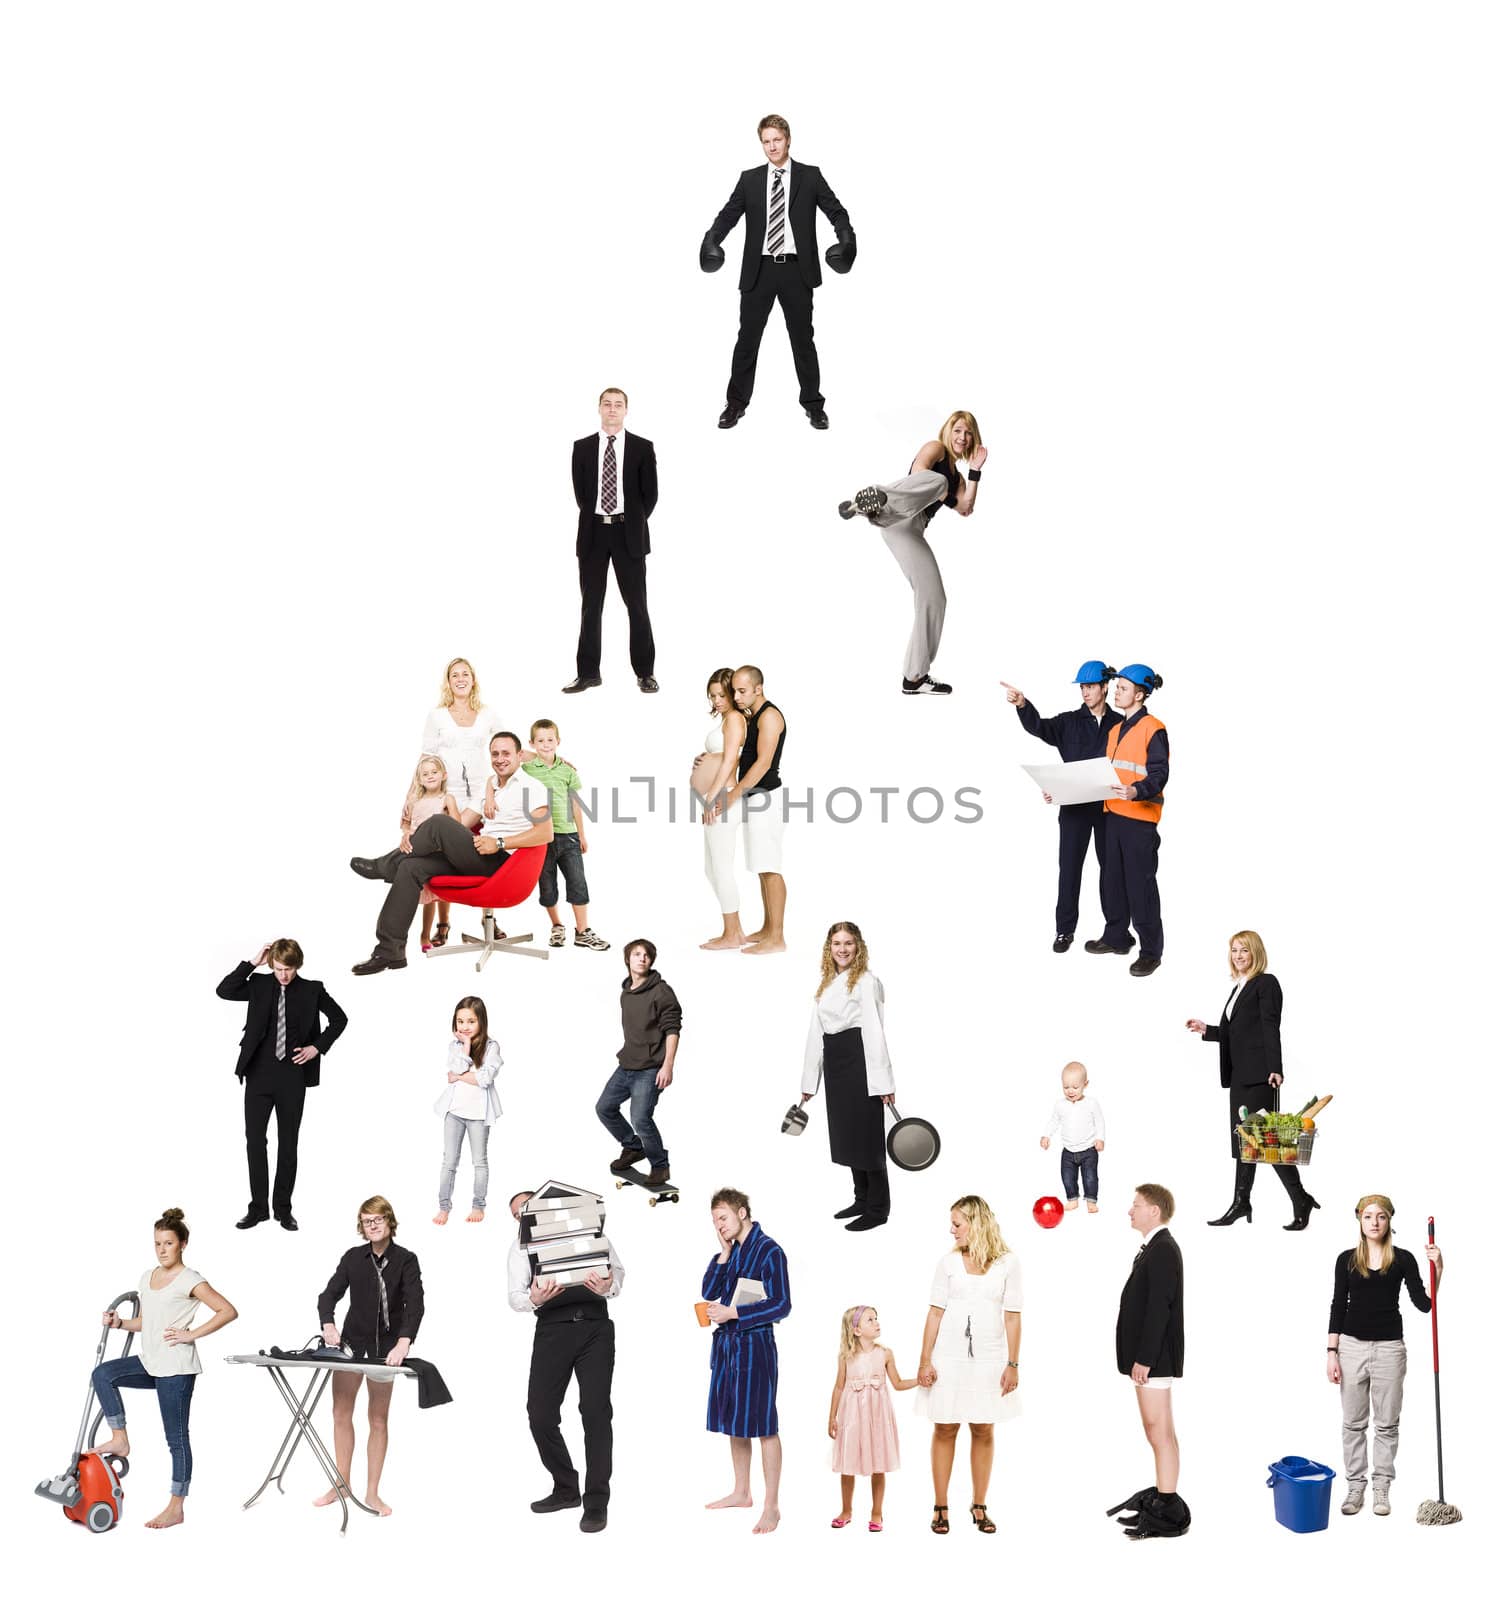 Pyramid of Real People isolated on white Background